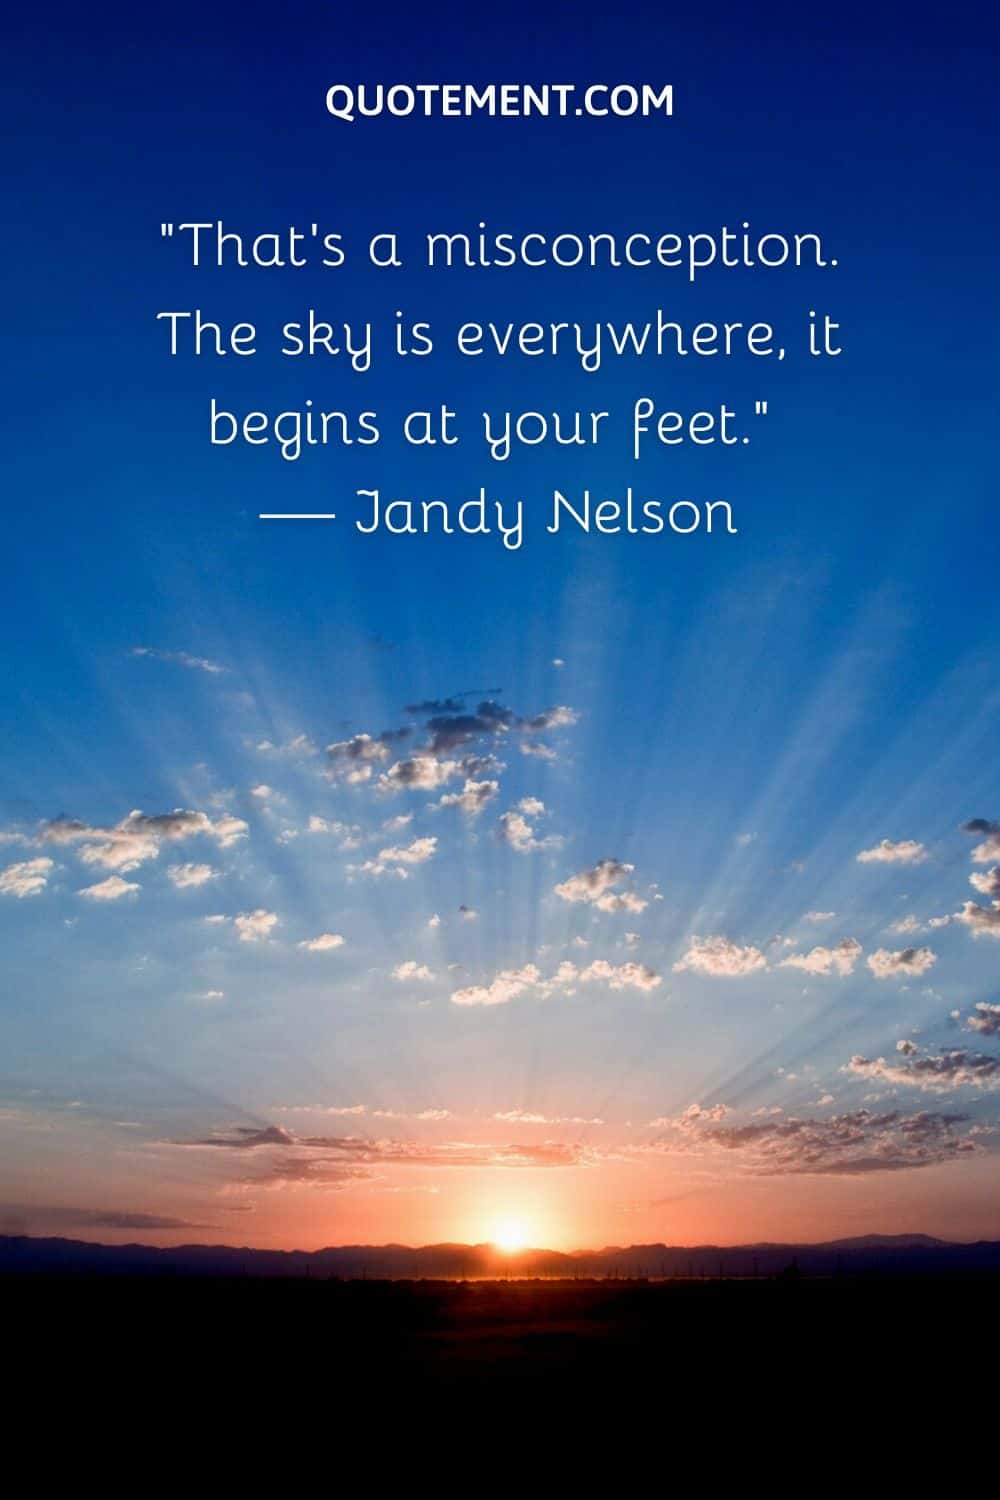 The sky is everywhere, it begins at your feet.